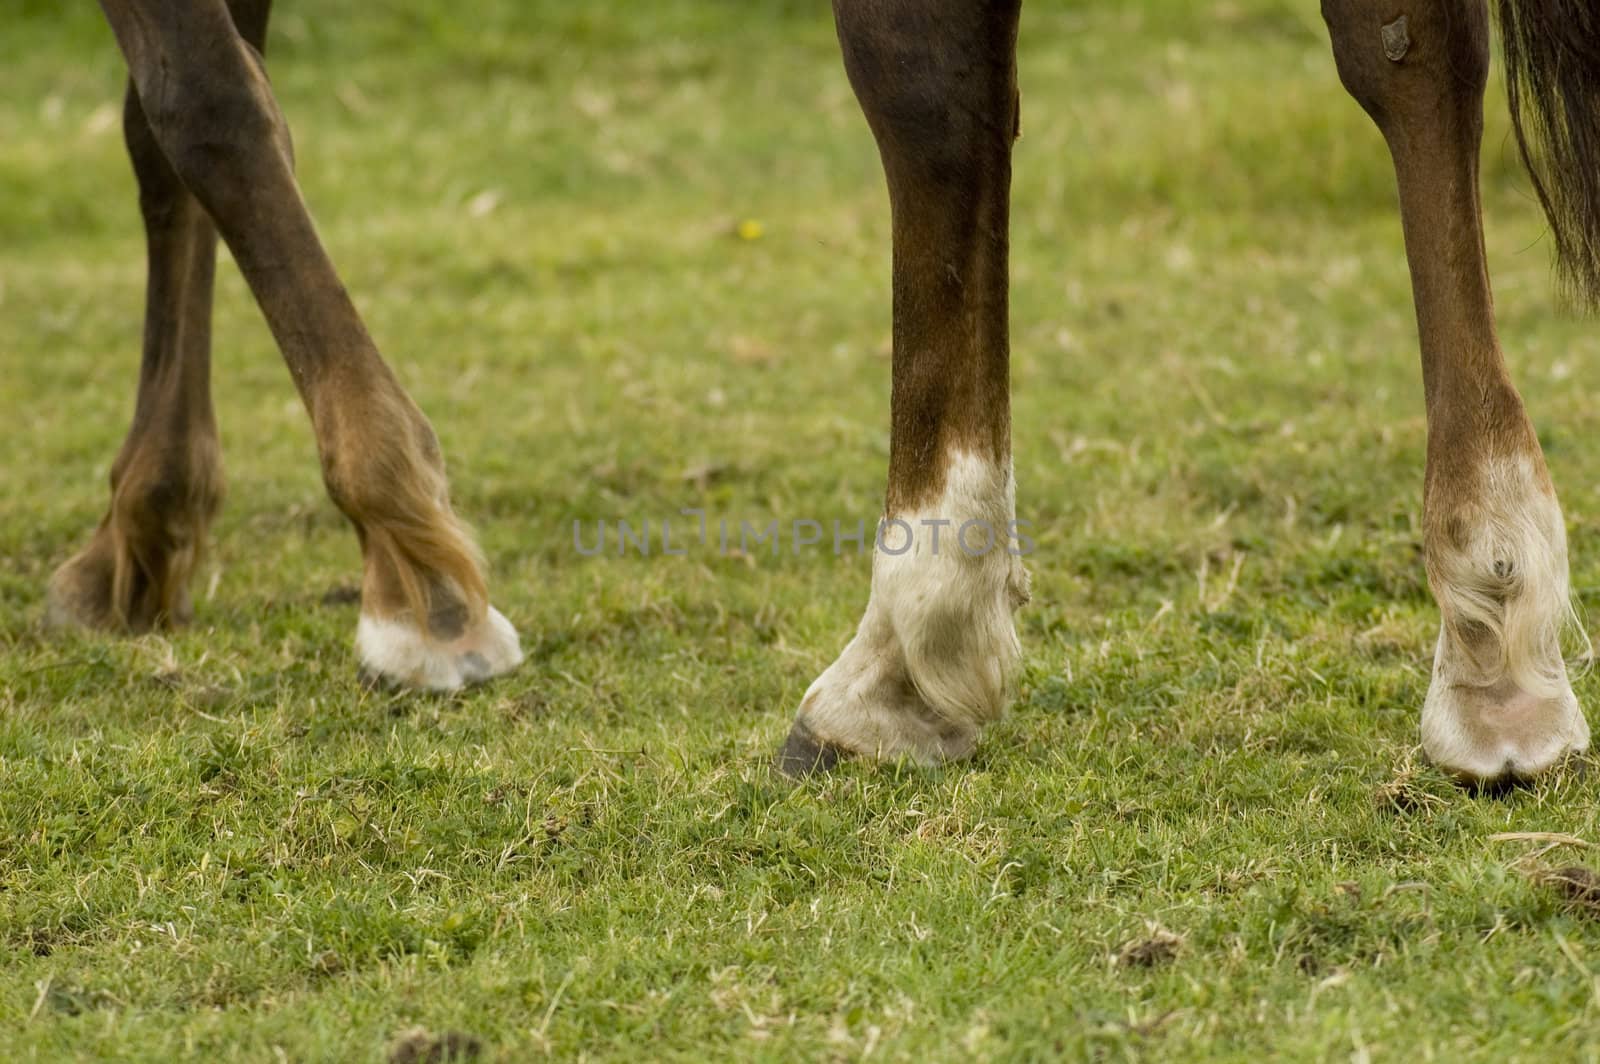 legs of a choconot mare by ladyminnie